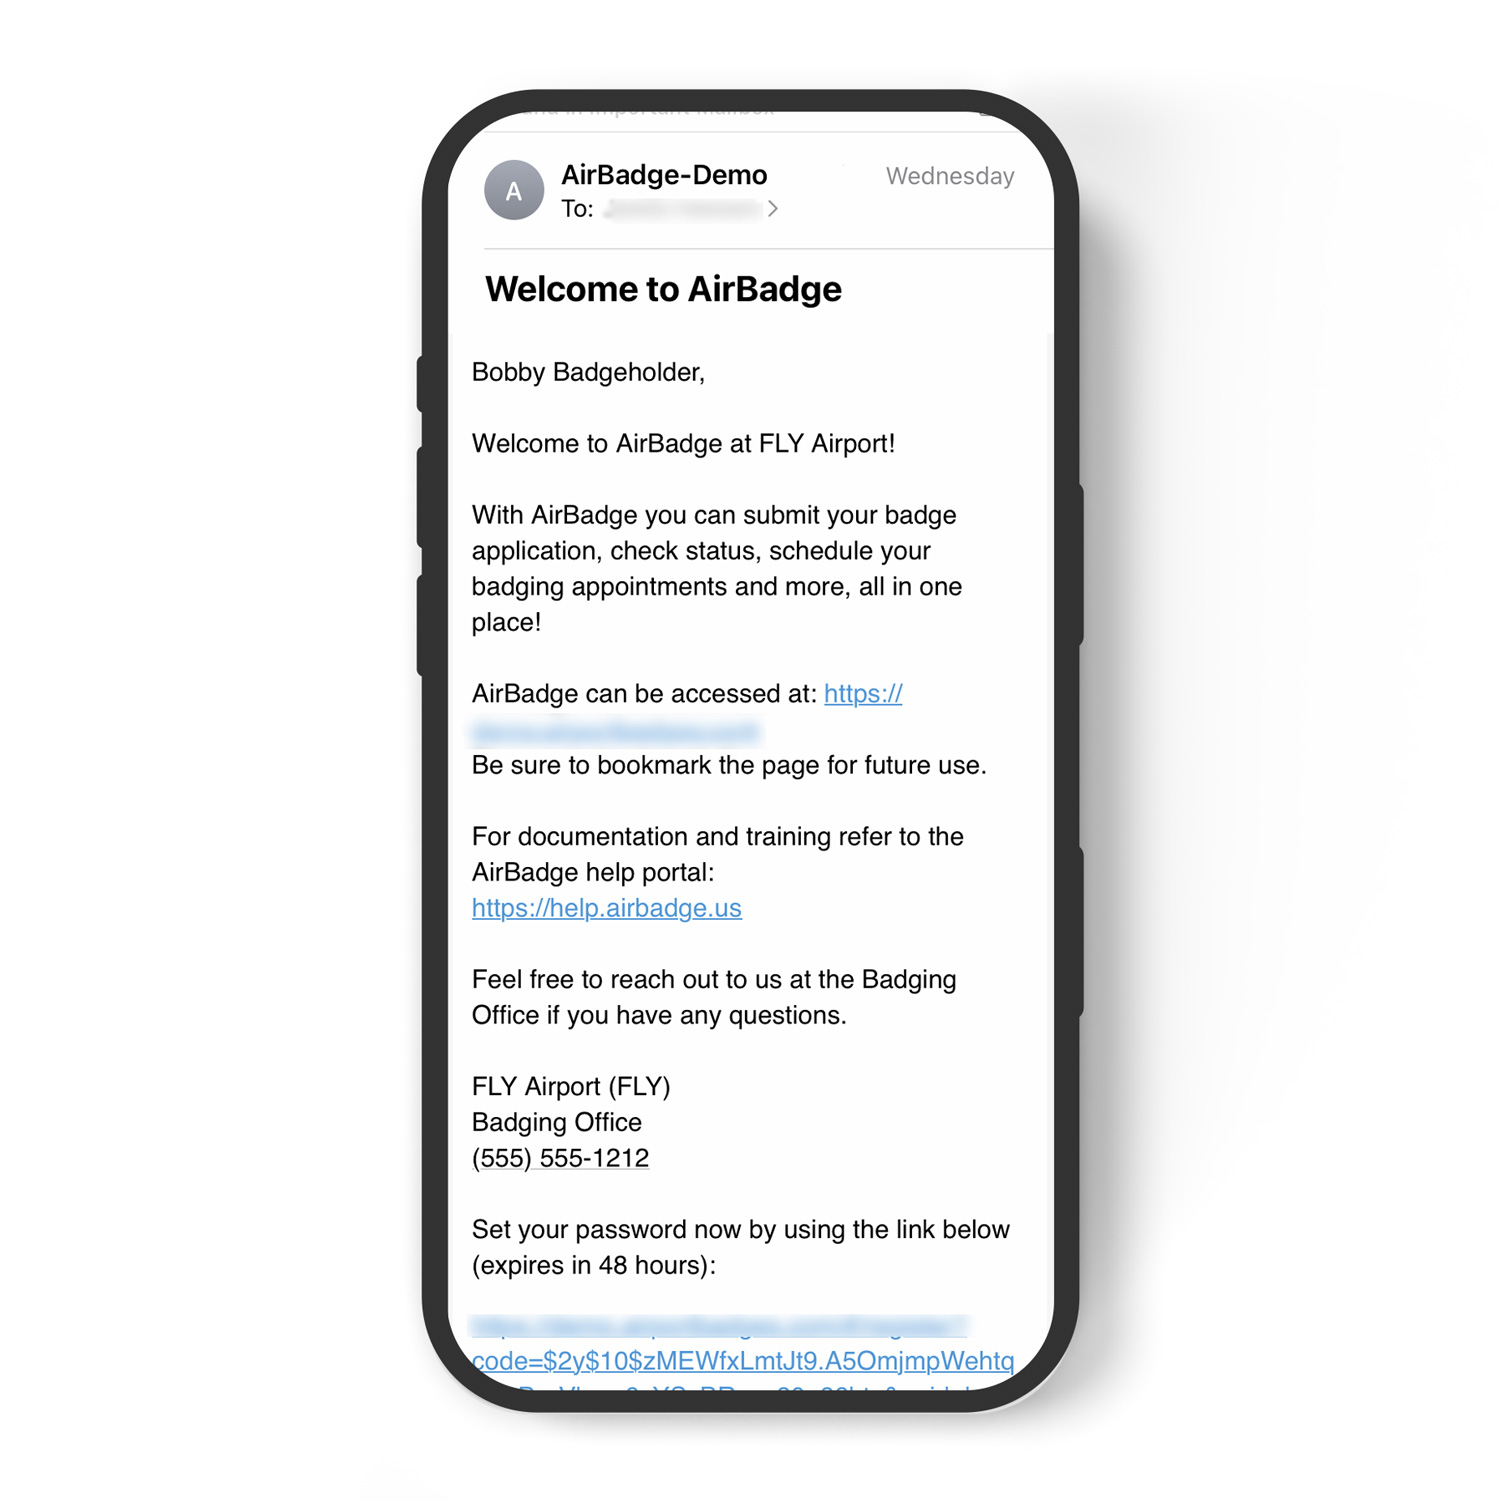 Welcome email from AirBadge